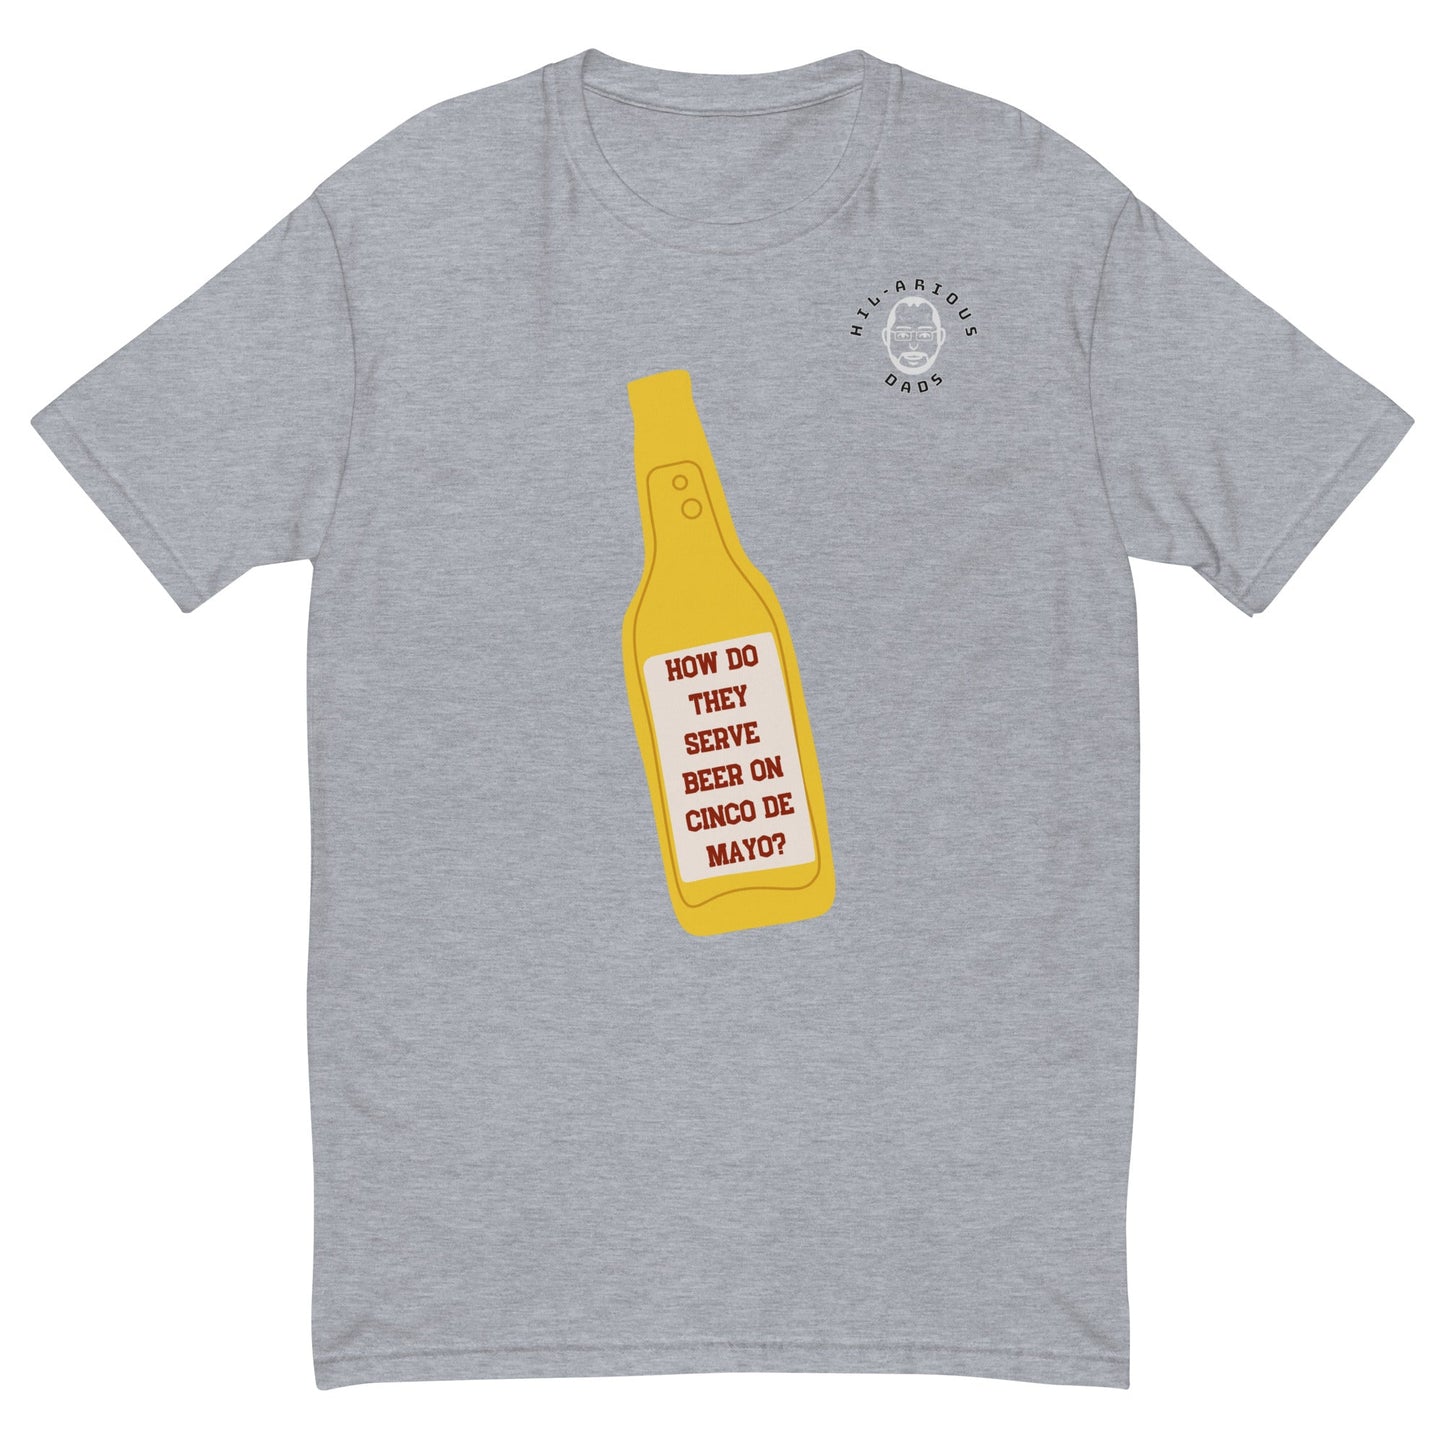 How do they serve beer on Cinco De Mayo?-T-shirt - Hil-arious Dads